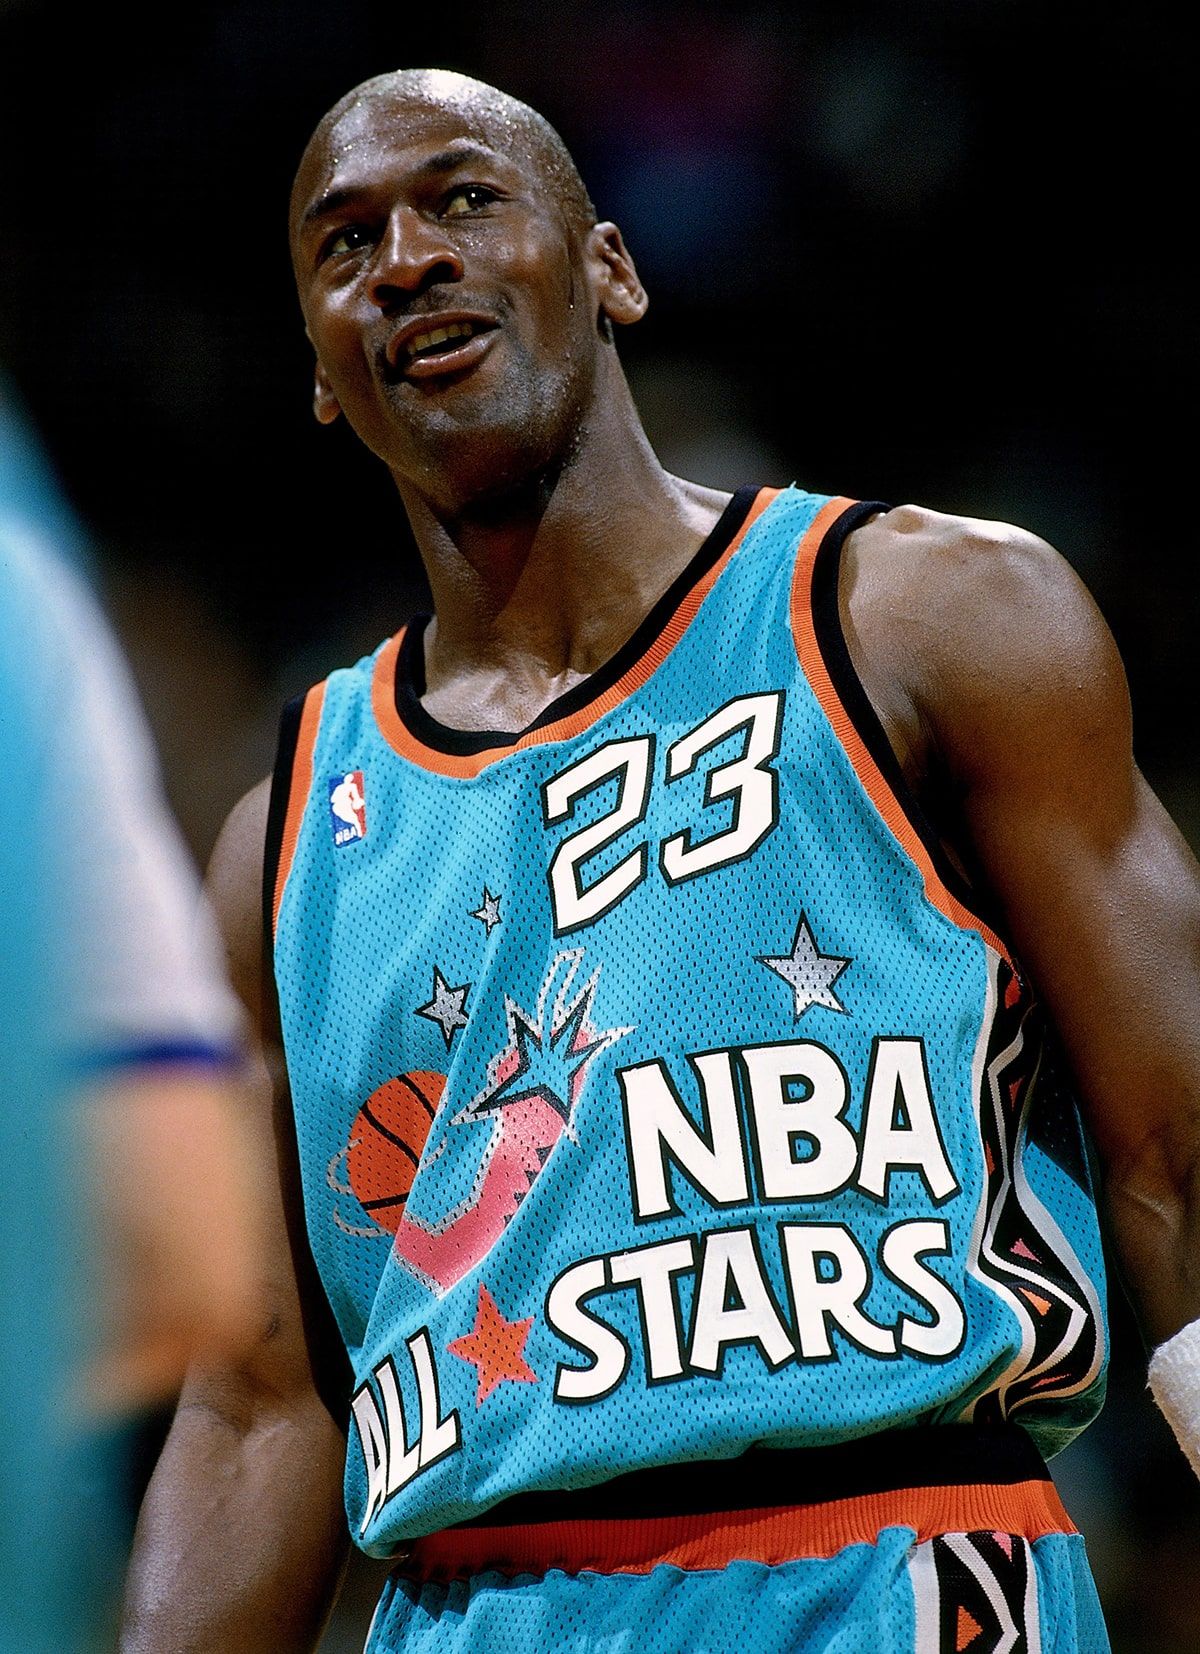 96 nba all star jersey for sale